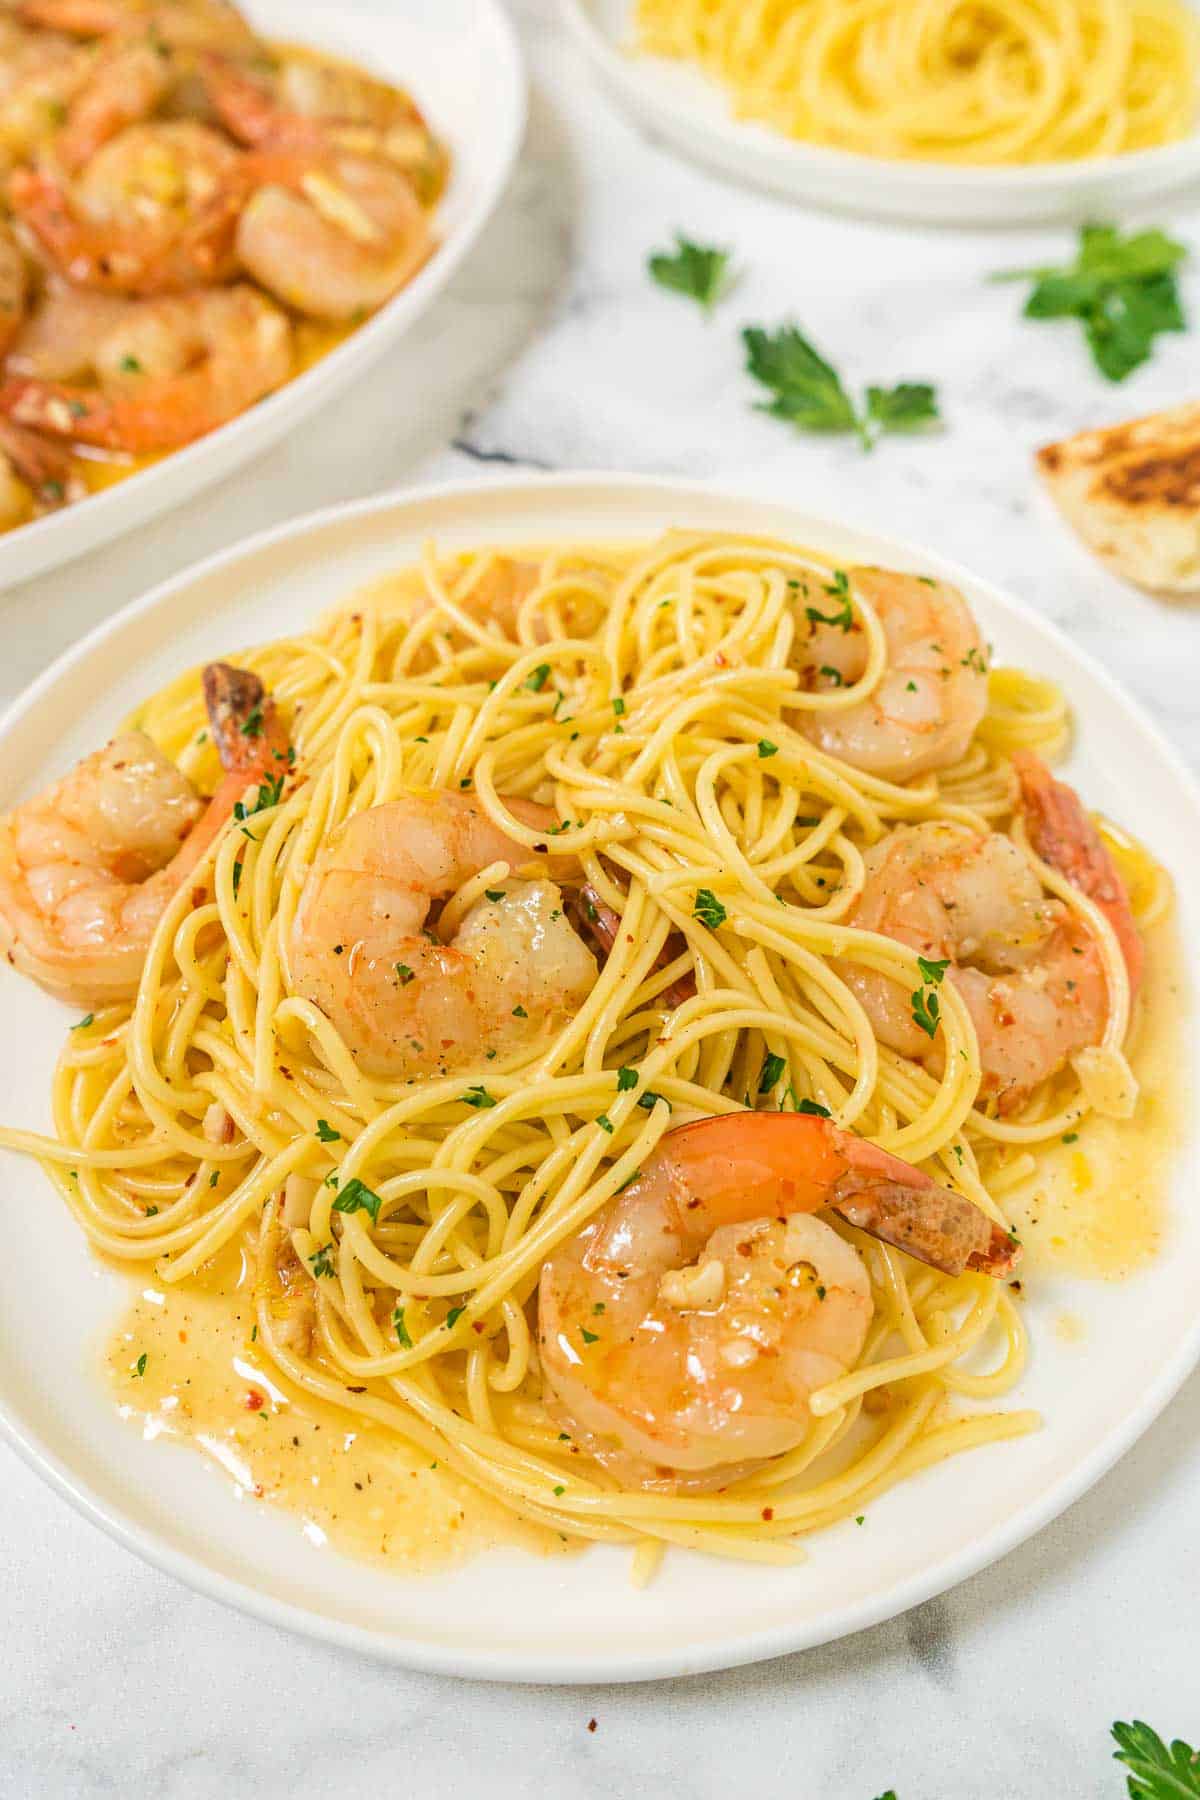 A plate of shrimp scampi served with pasta.